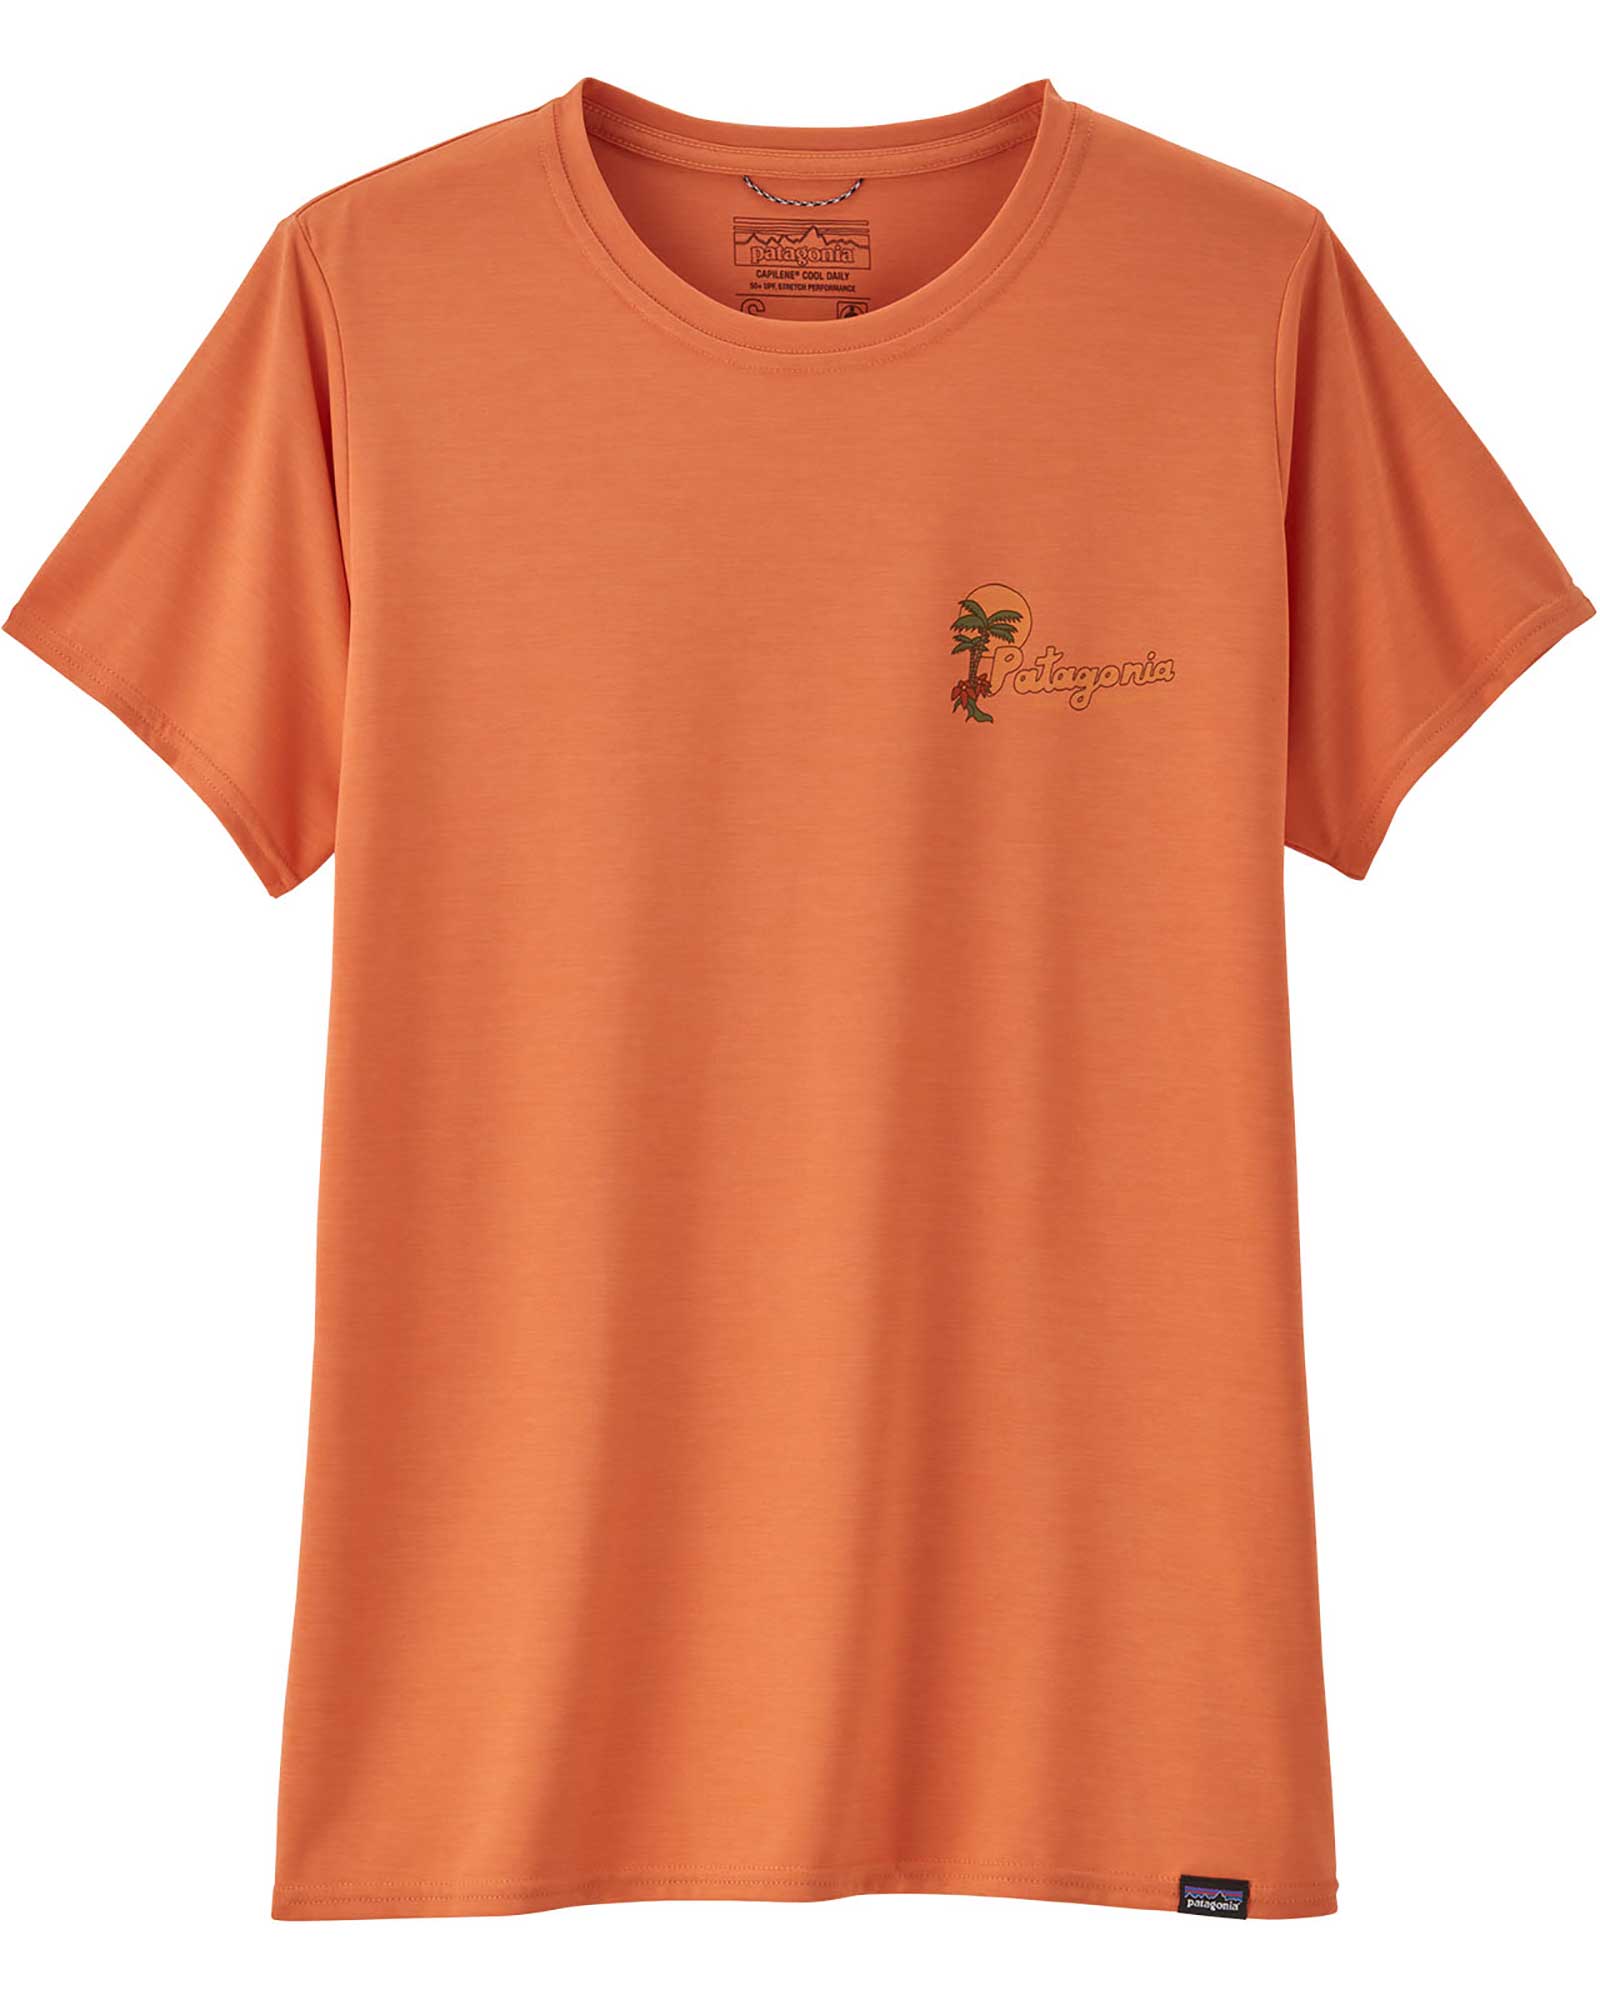 Patagonia Capilene Cool Daily Graphic Women’s T Shirt - Tigerlily Orange/Palm Protest M